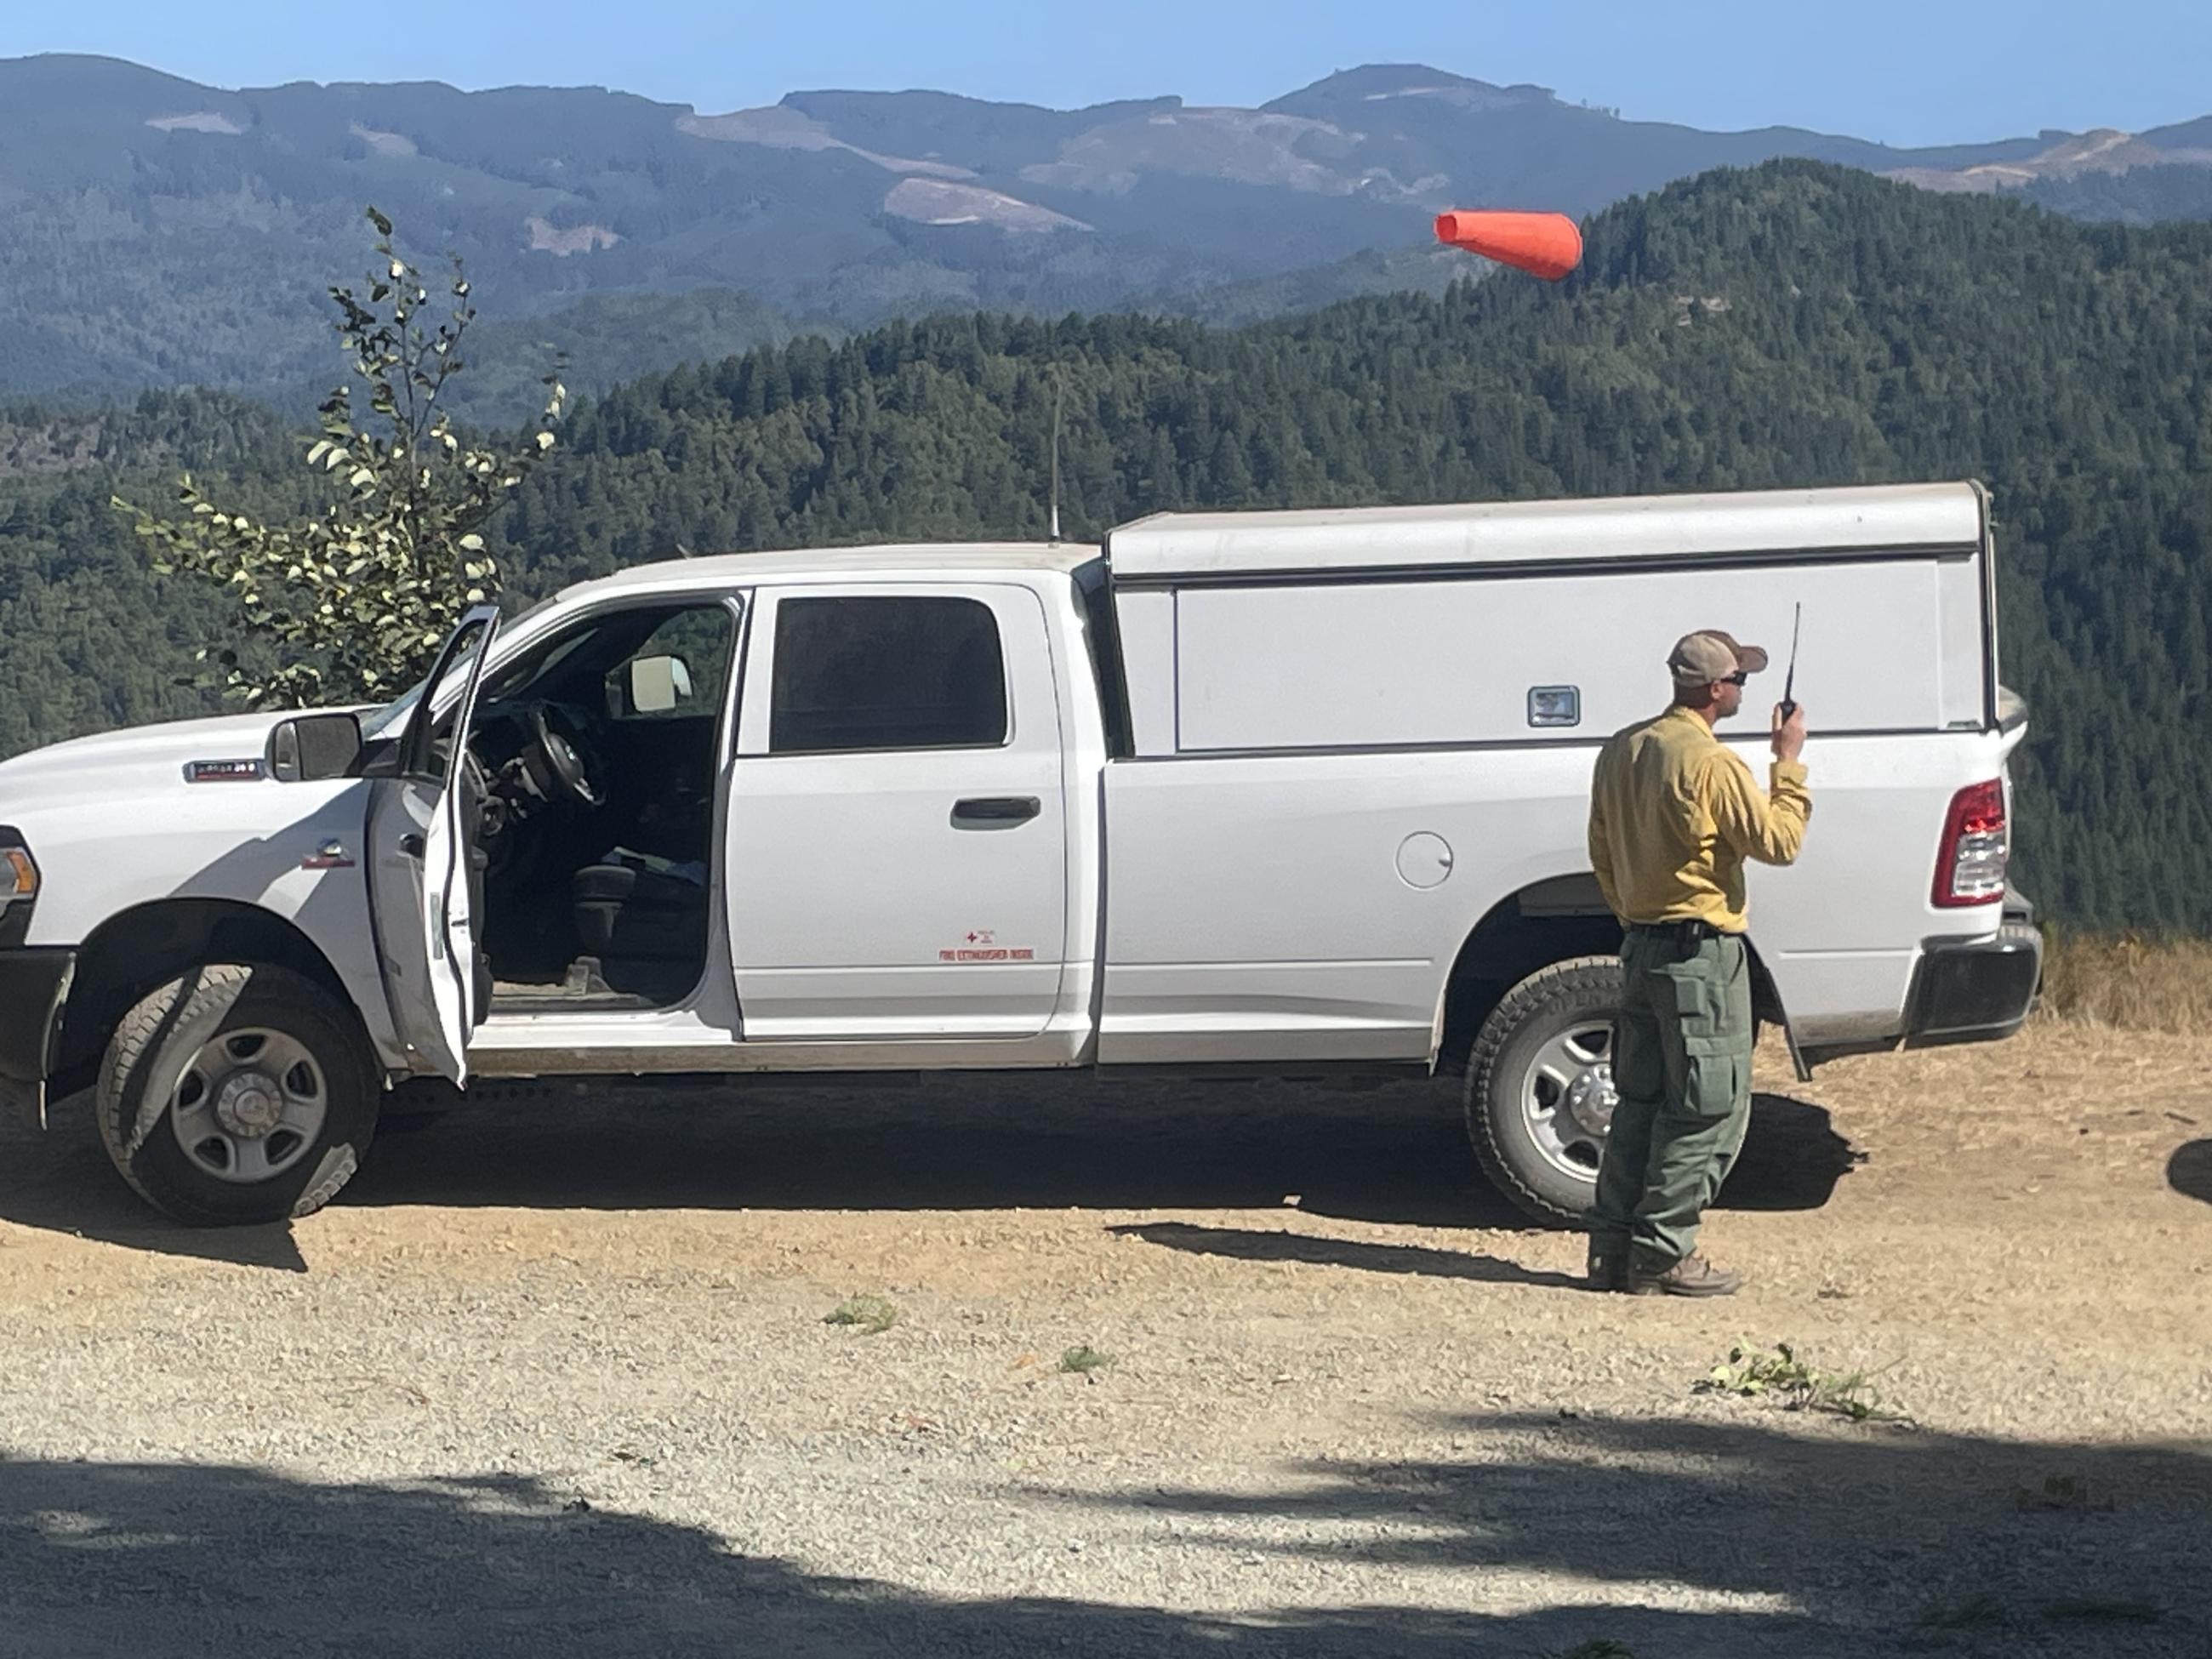 Windsock on the Anvil Fire 9/19